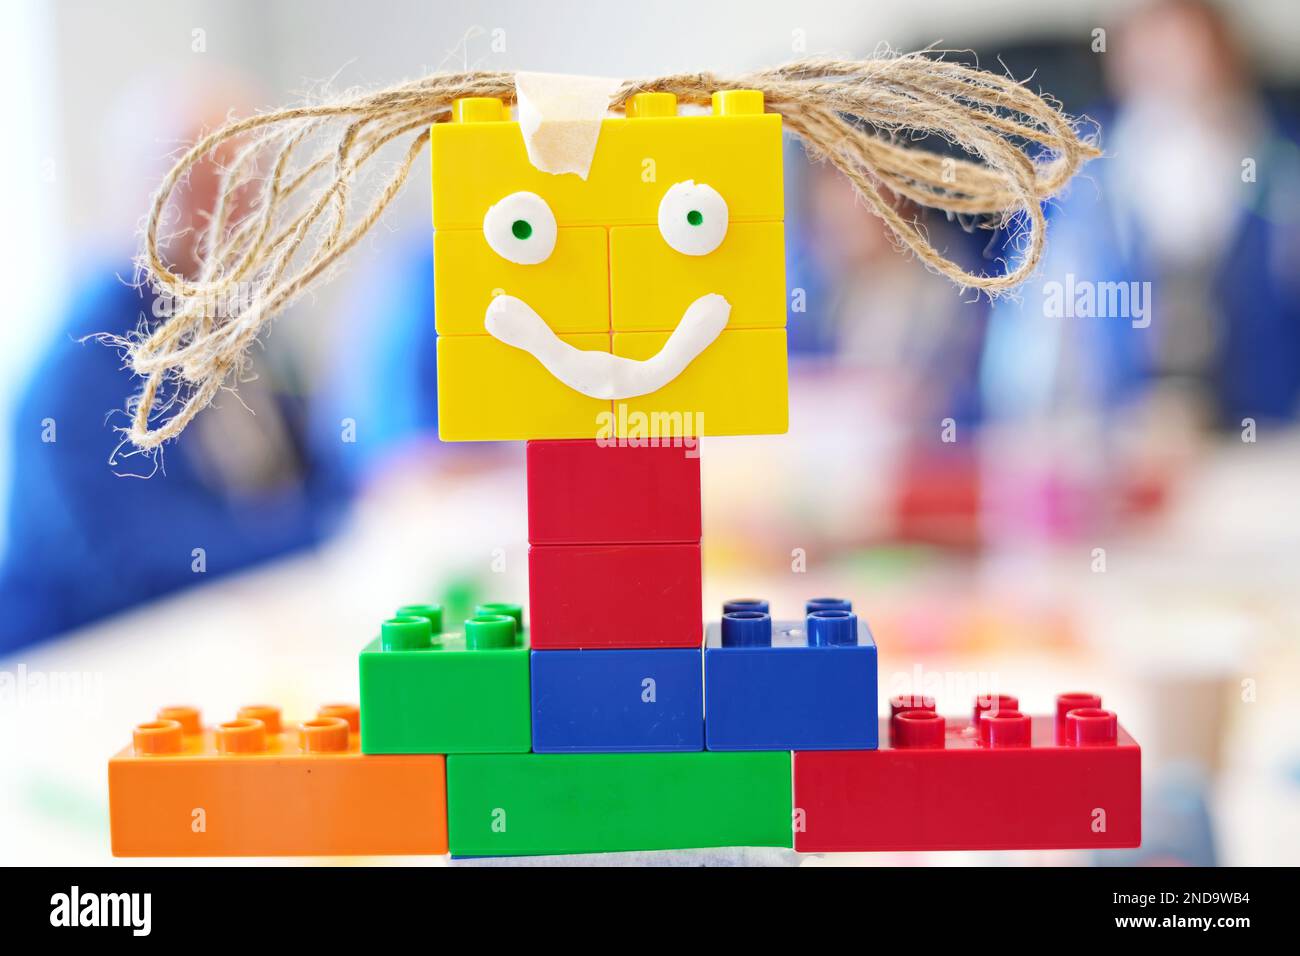 Smiling Toy robot made from toy plastic colorful blocks Stock Photo